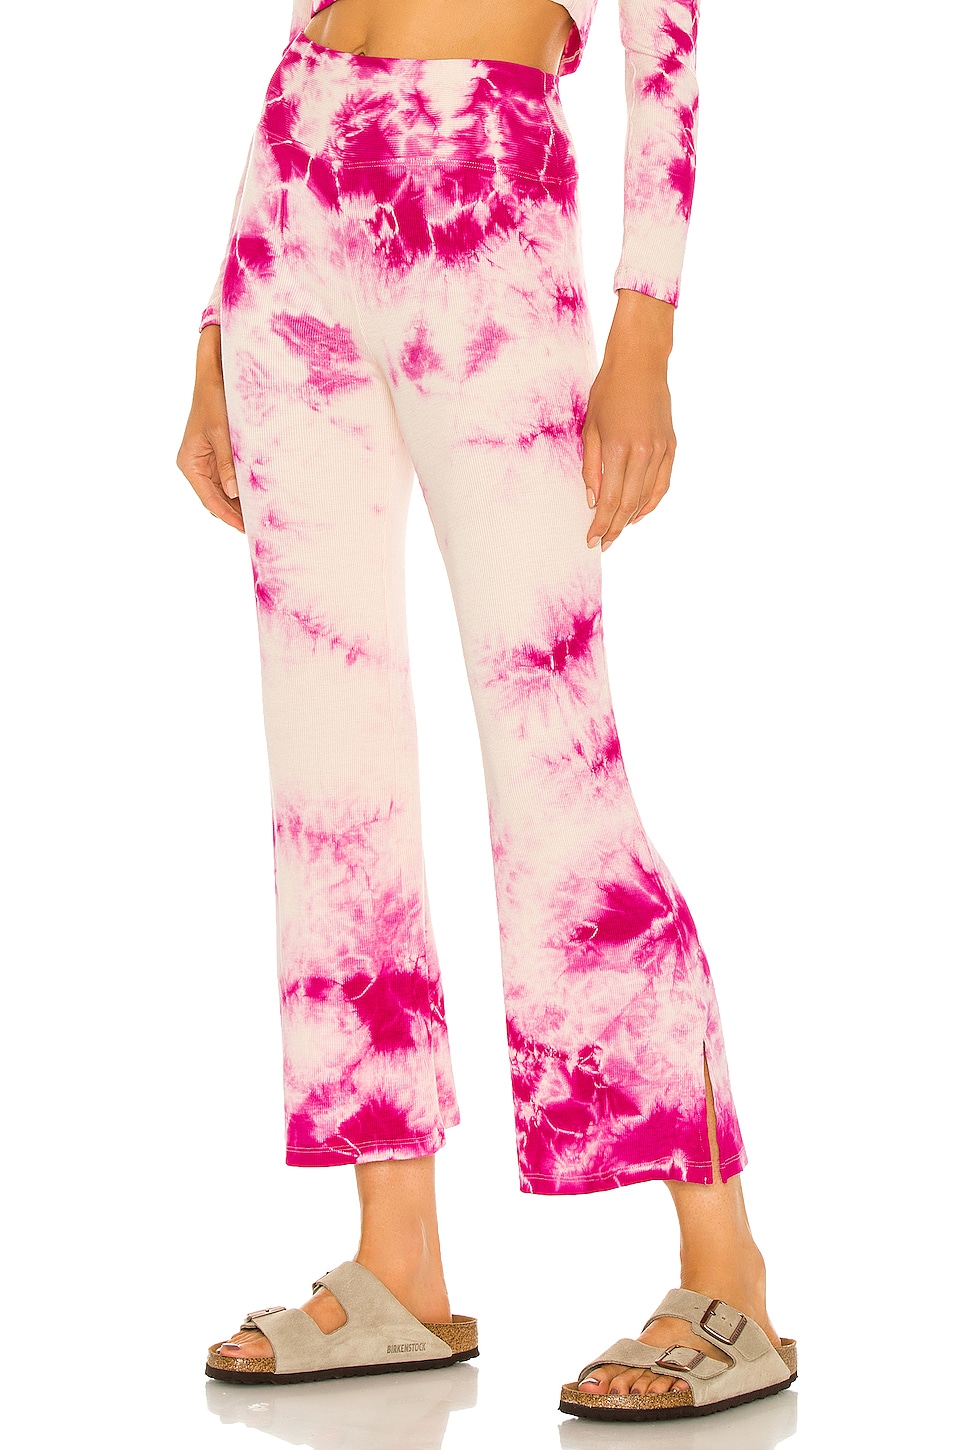 YEAR OF OURS LoungeHose Pink Tie Dye